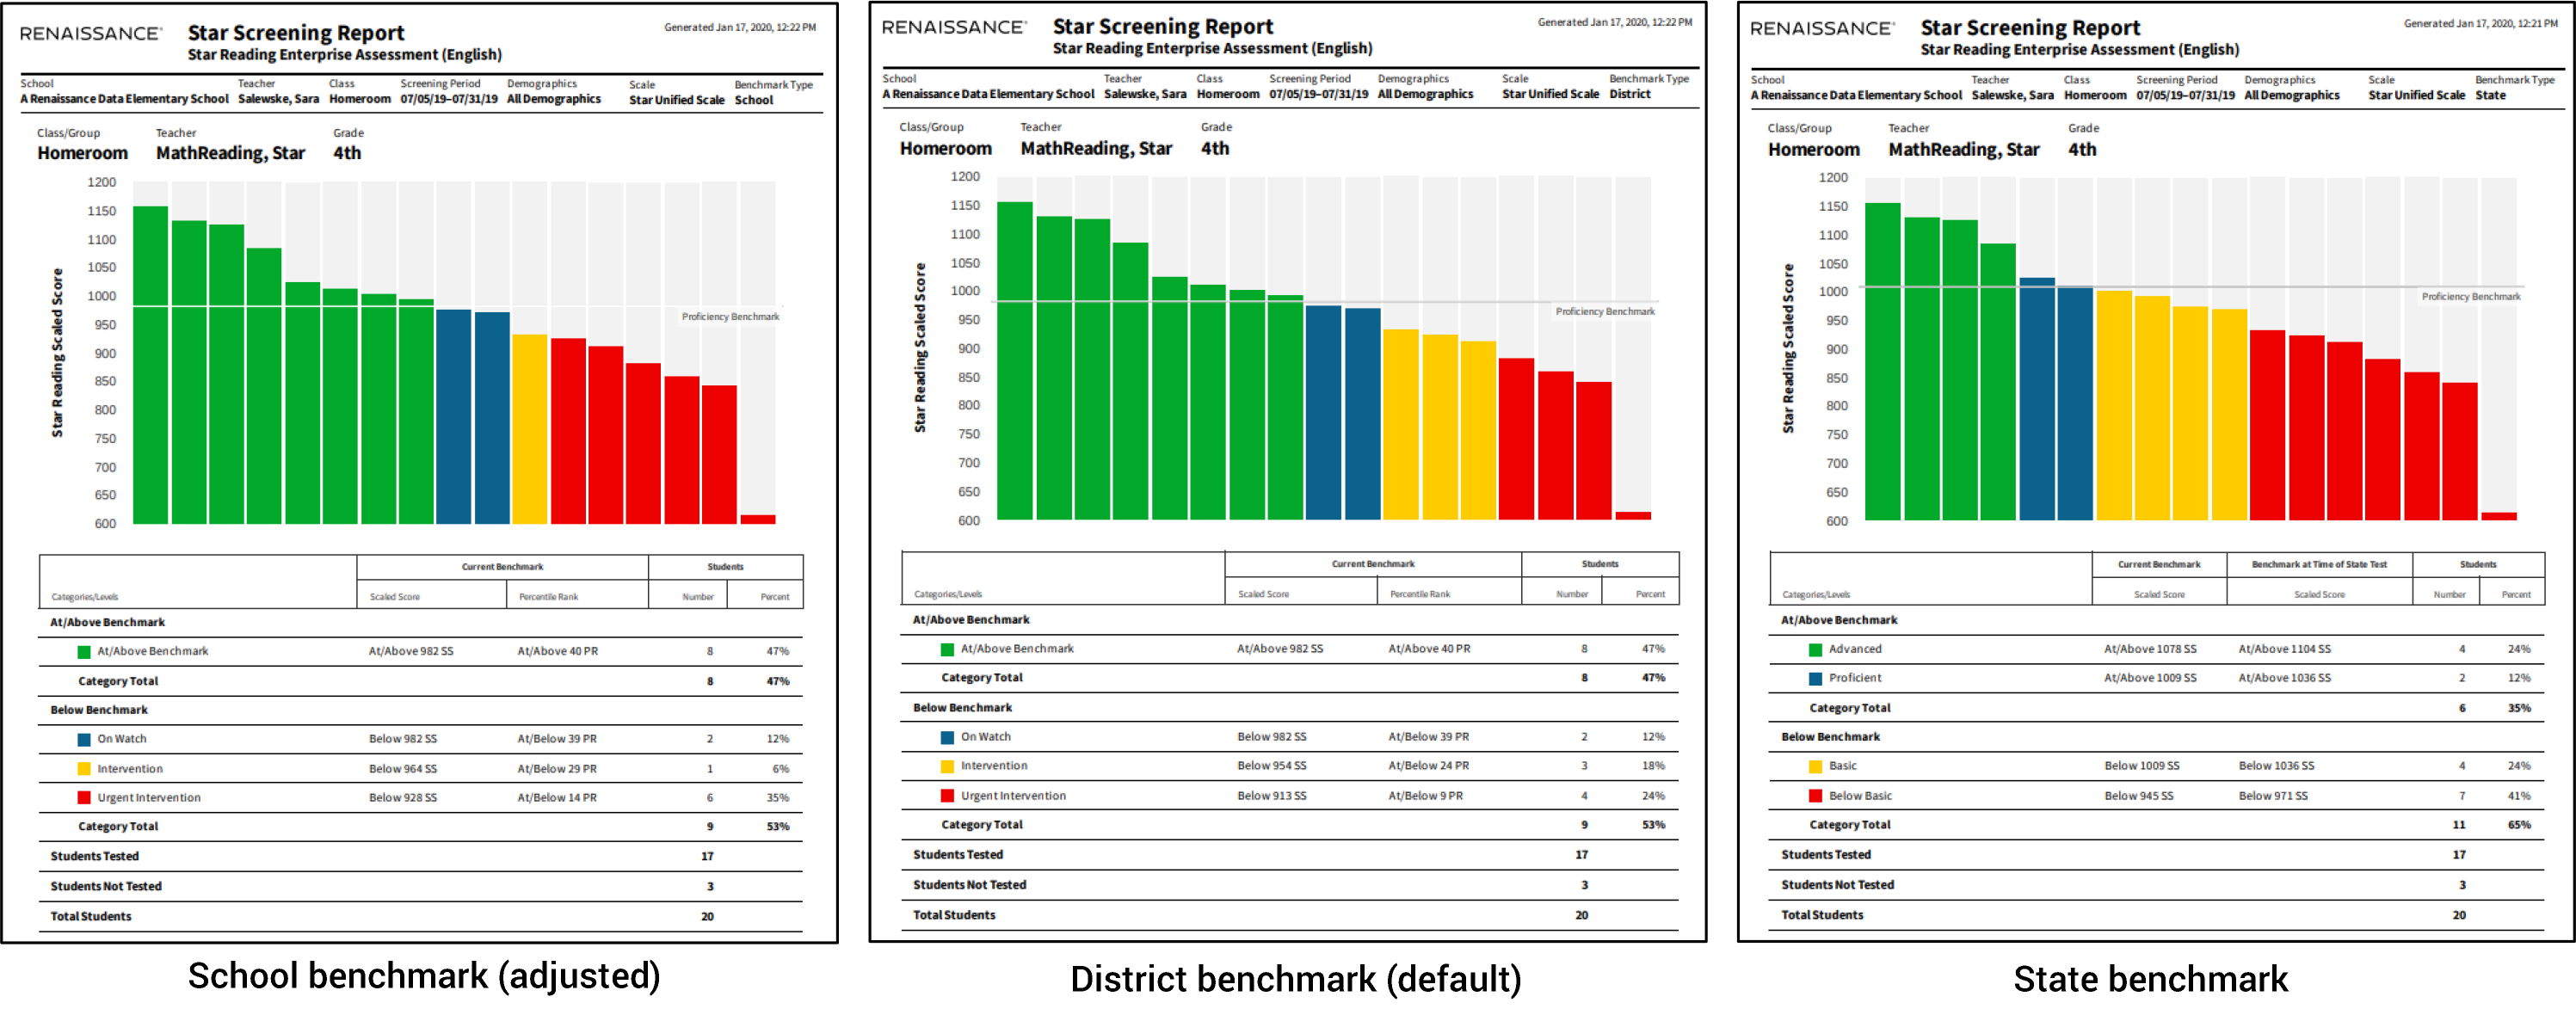 Three versions of an example report (Star Screening), shown with school benchmarks, district benchmarks, and state benchmarks; the graphs and tables change based on the benchmark being used.